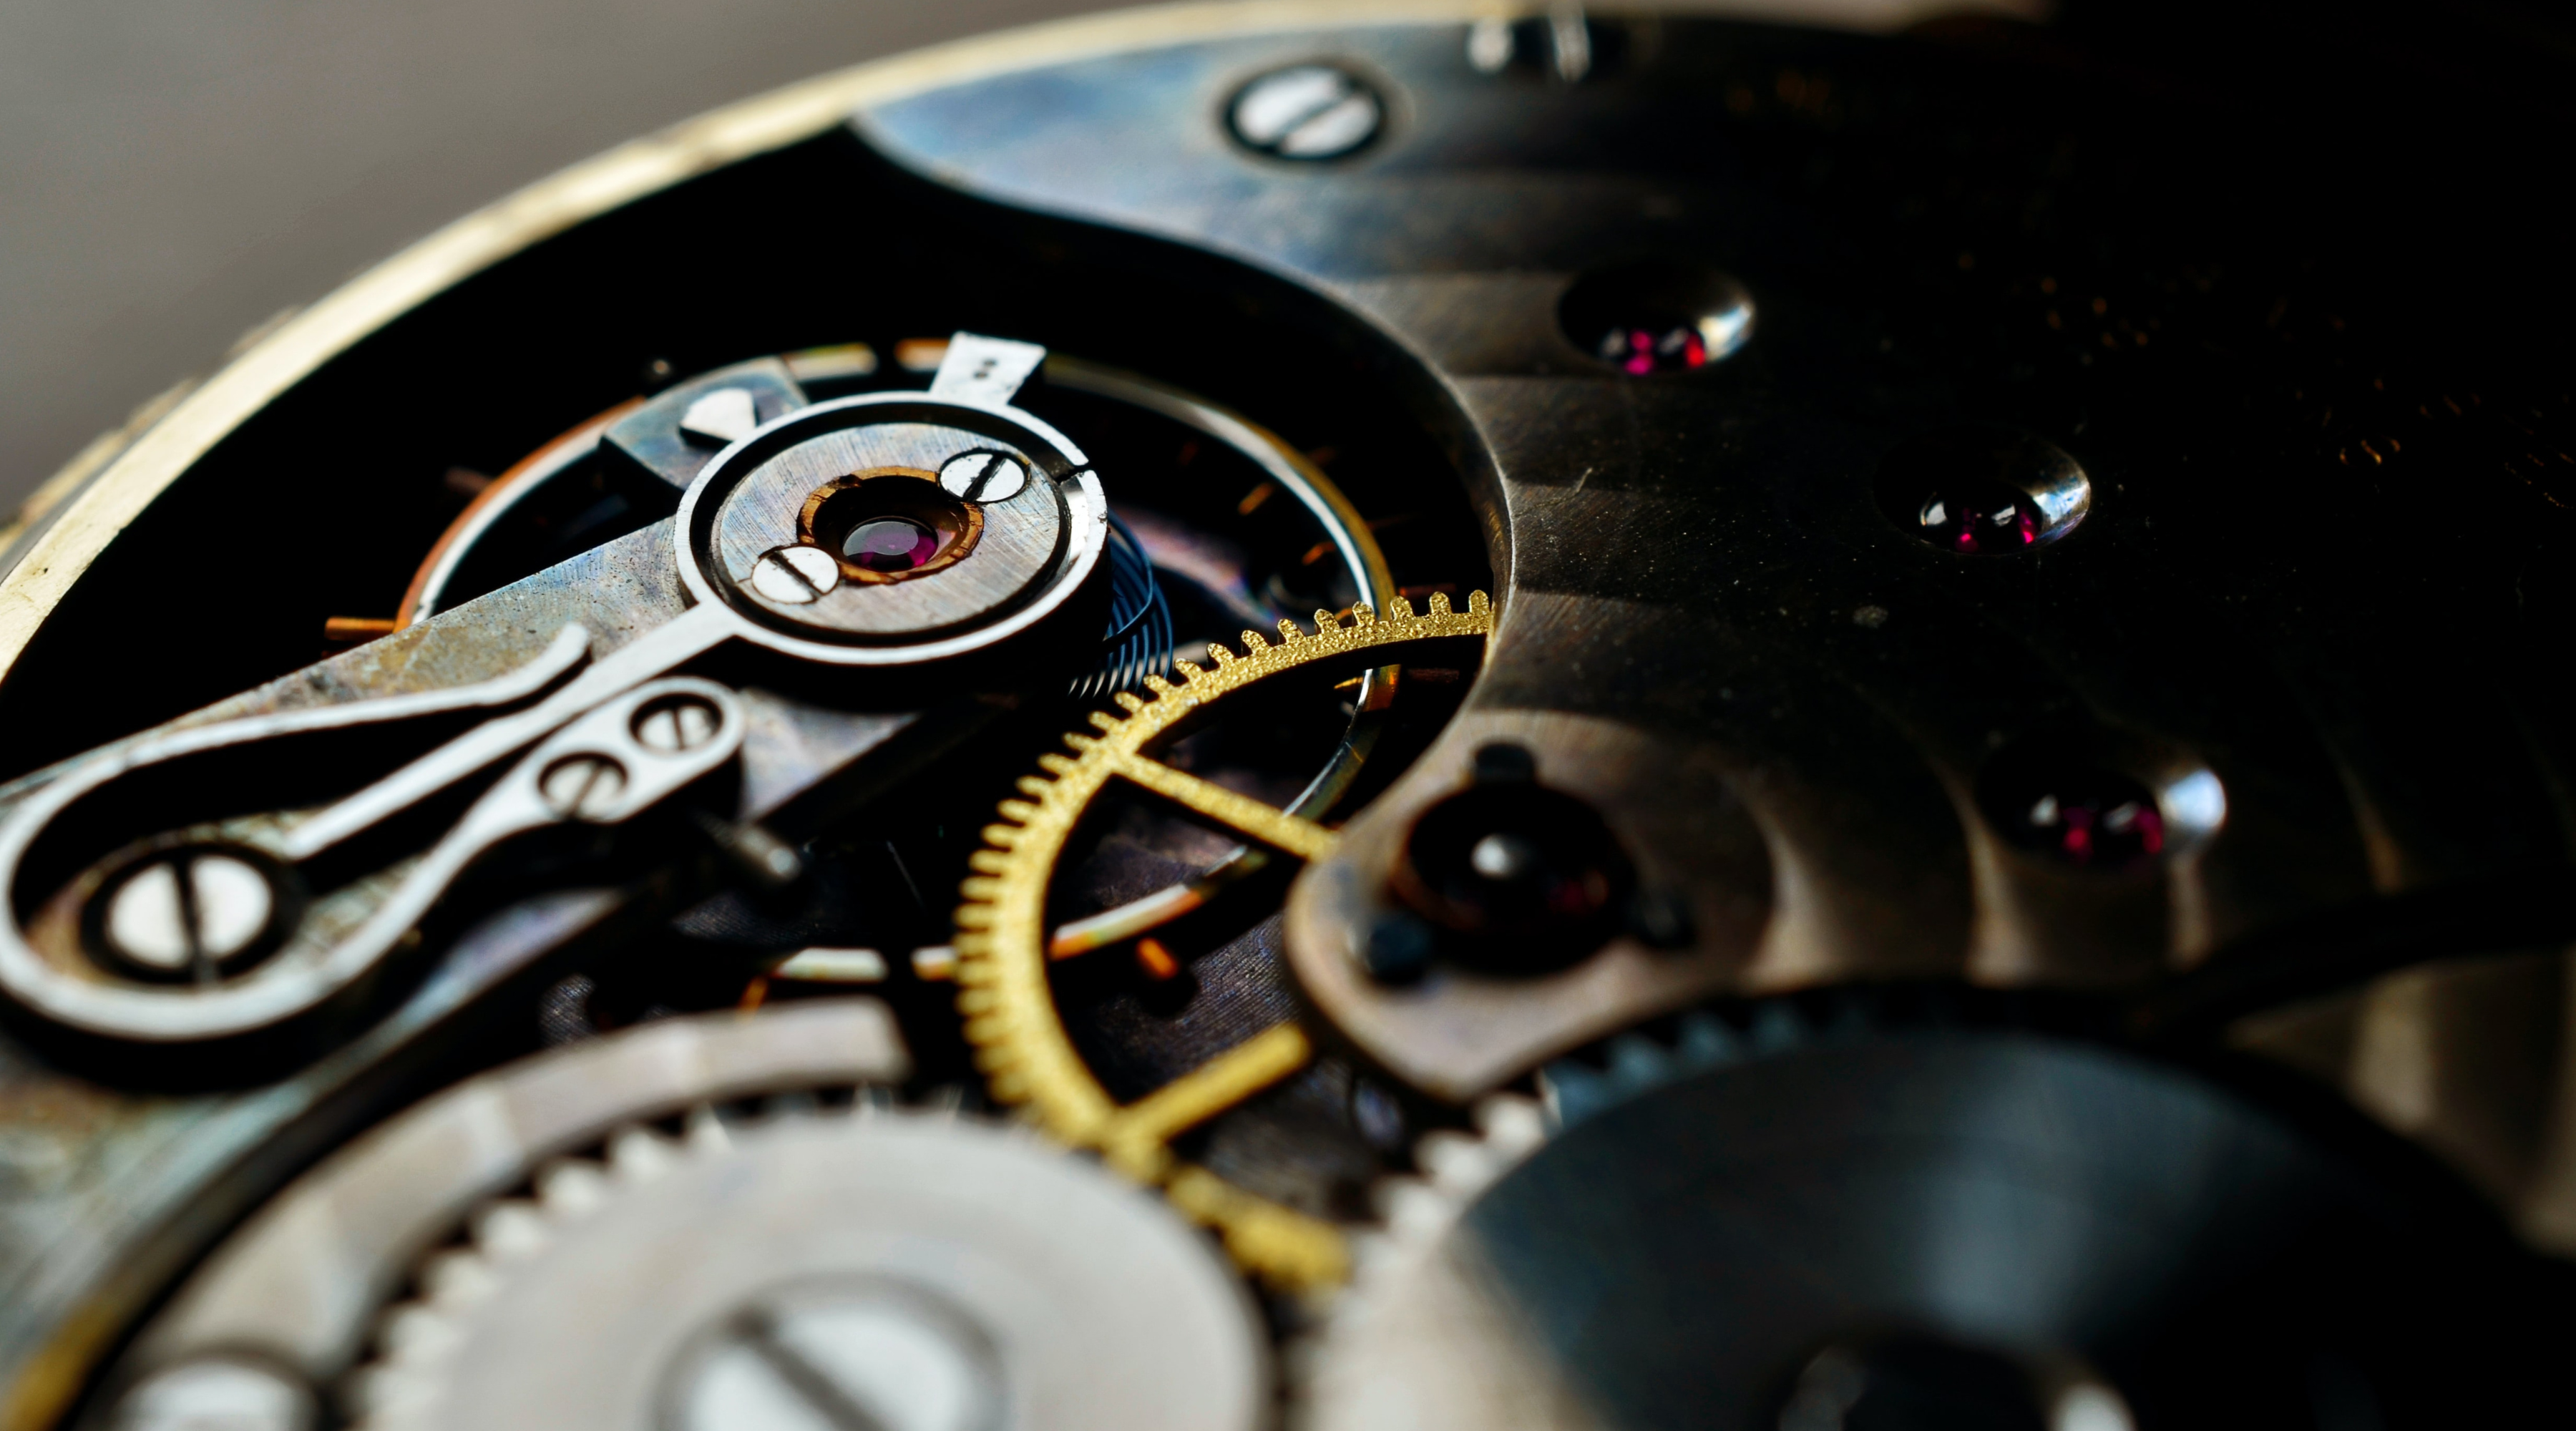 Article: Is It Possible to Have Watchmaking or Repairing Watches as a Hobby?